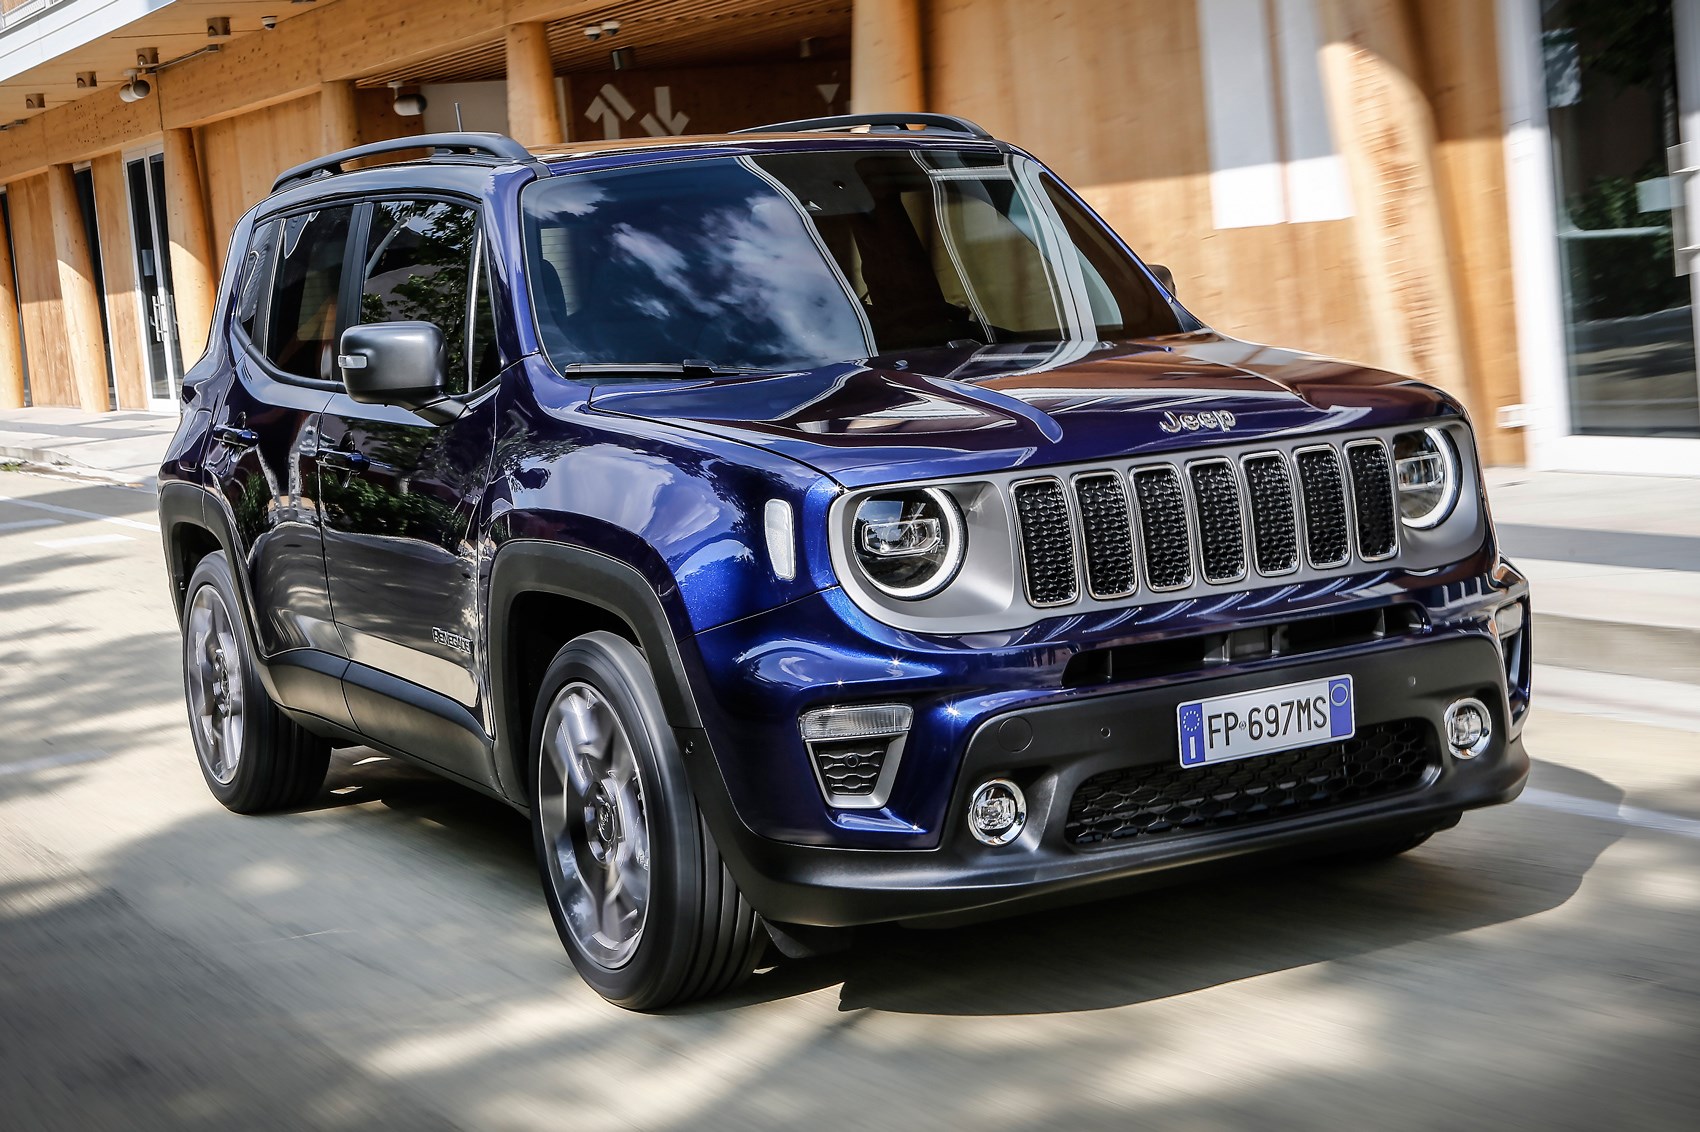 Jeep Renegade (2018) SUV review: chunky charm